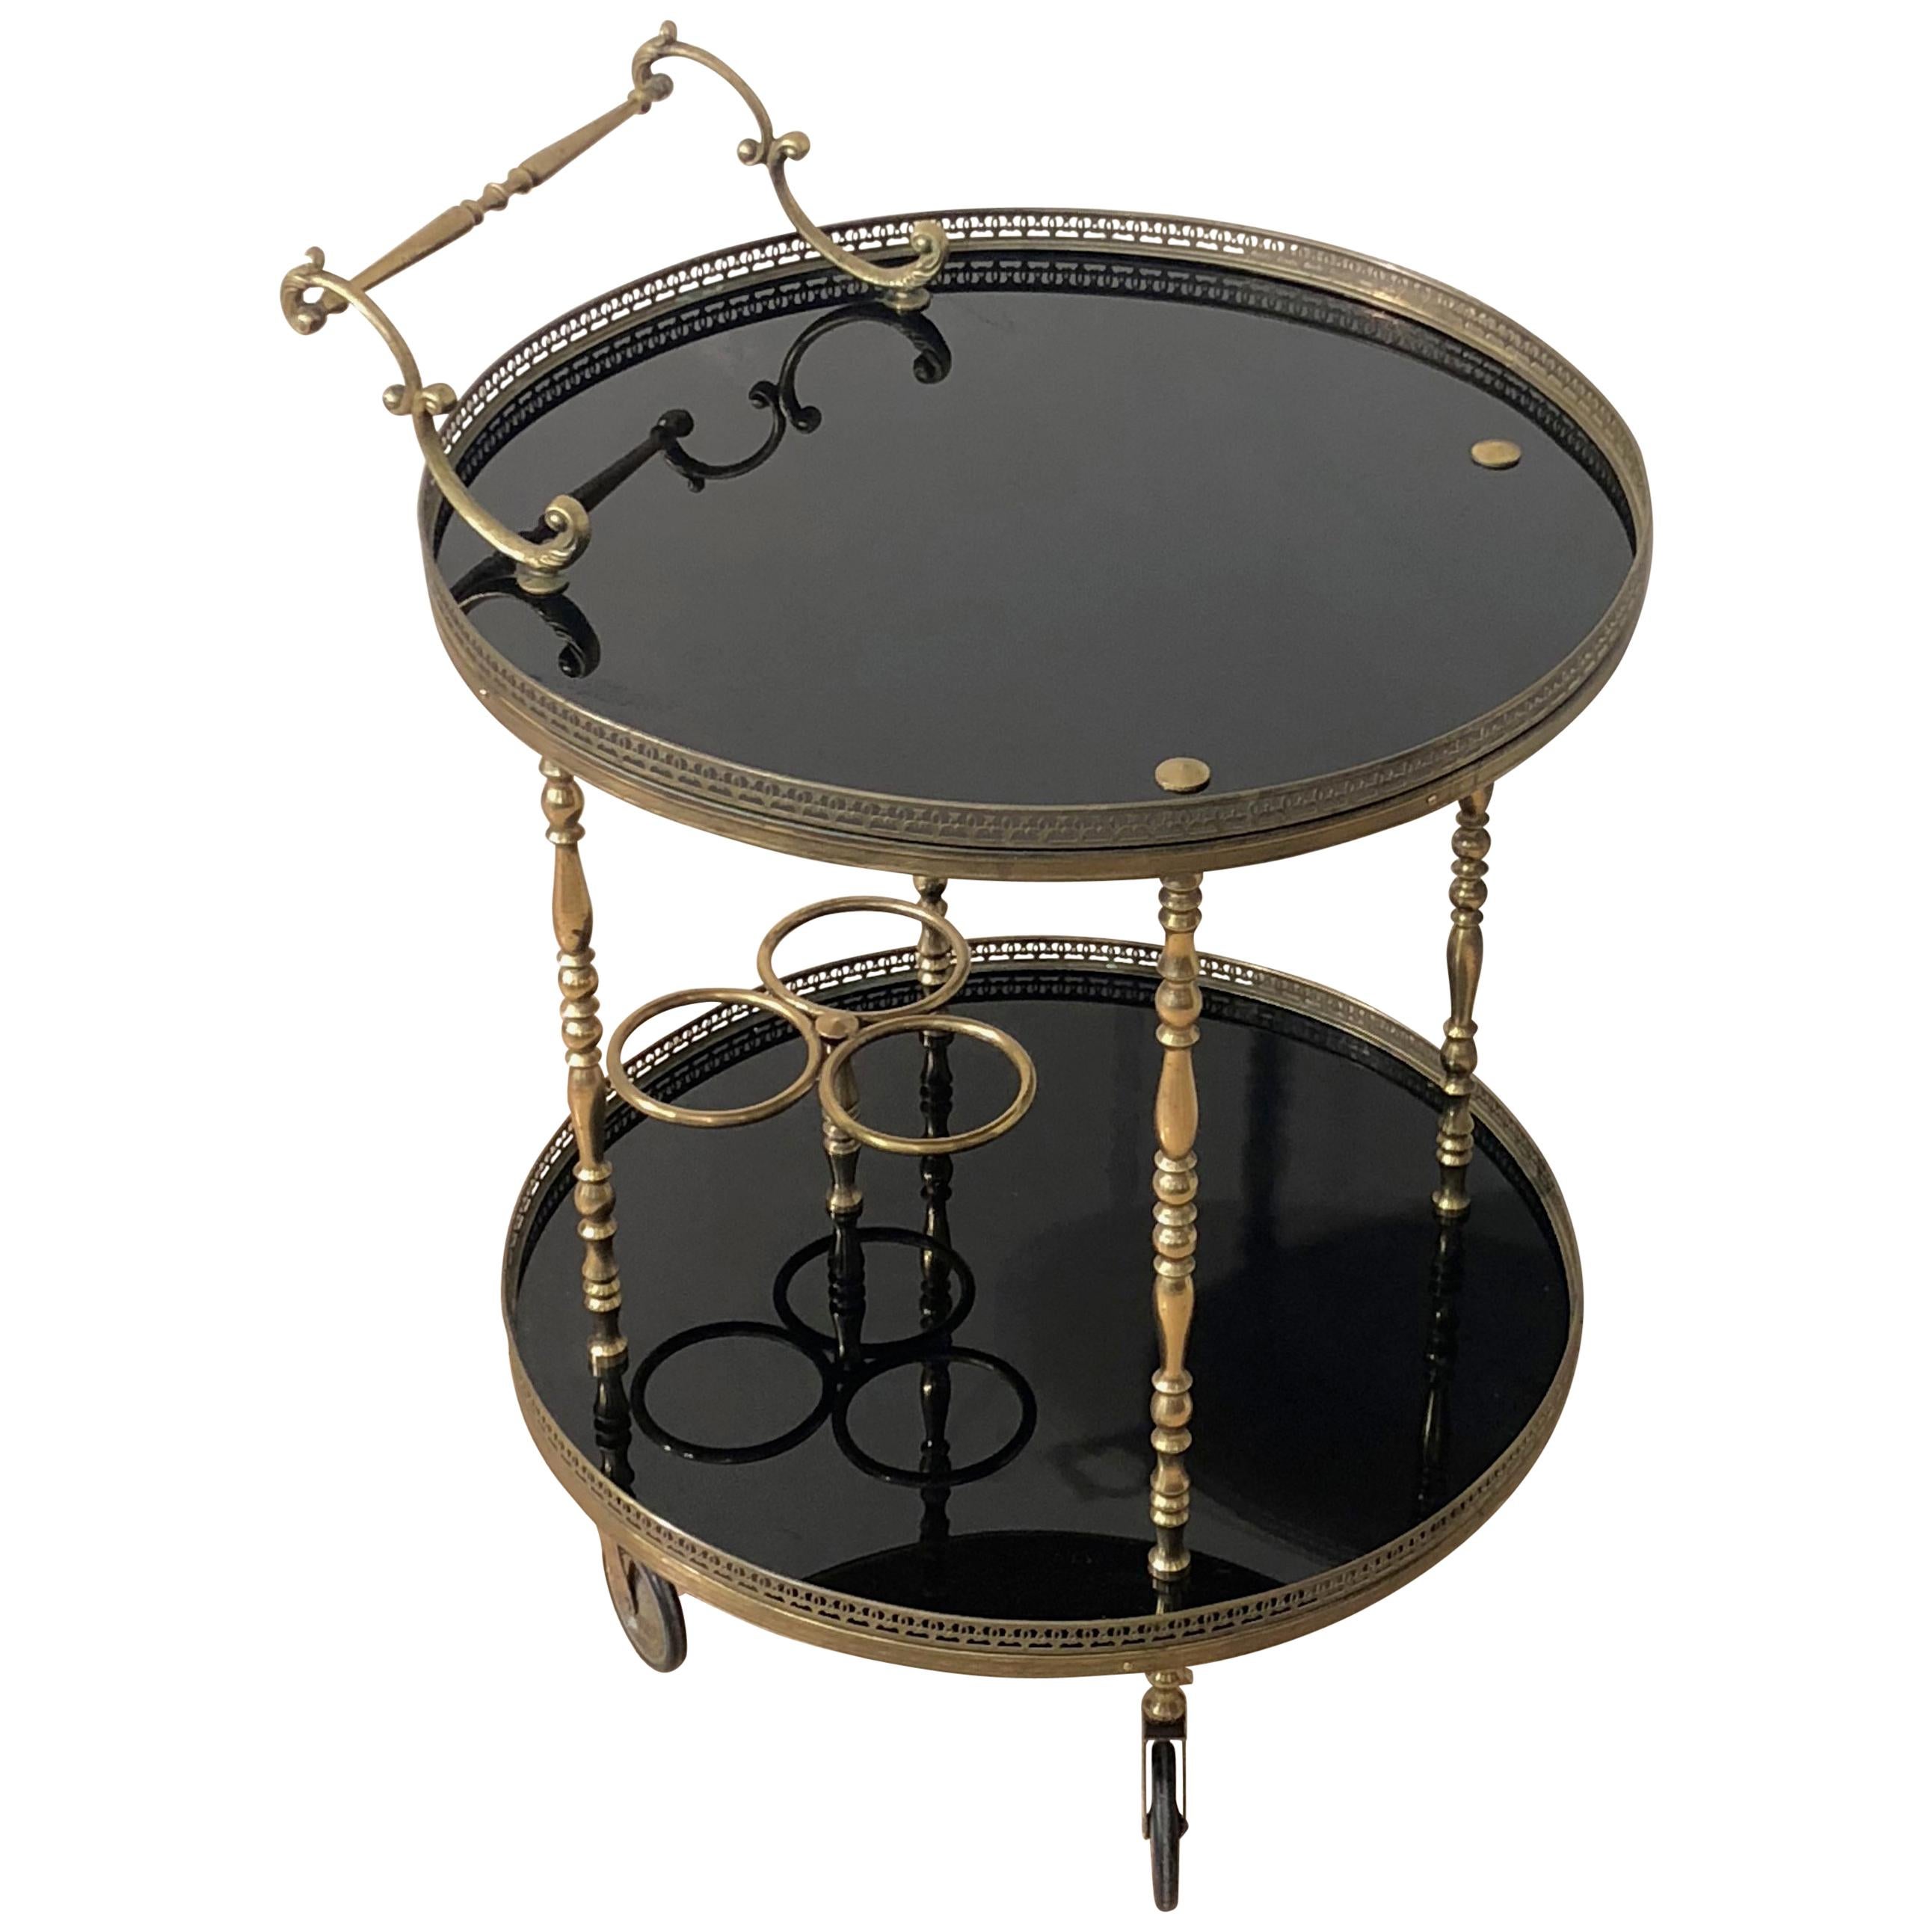 Art Deco Brass and Shiny Black Lacquer Rounded Bottle Holder Tray, France, 1940s